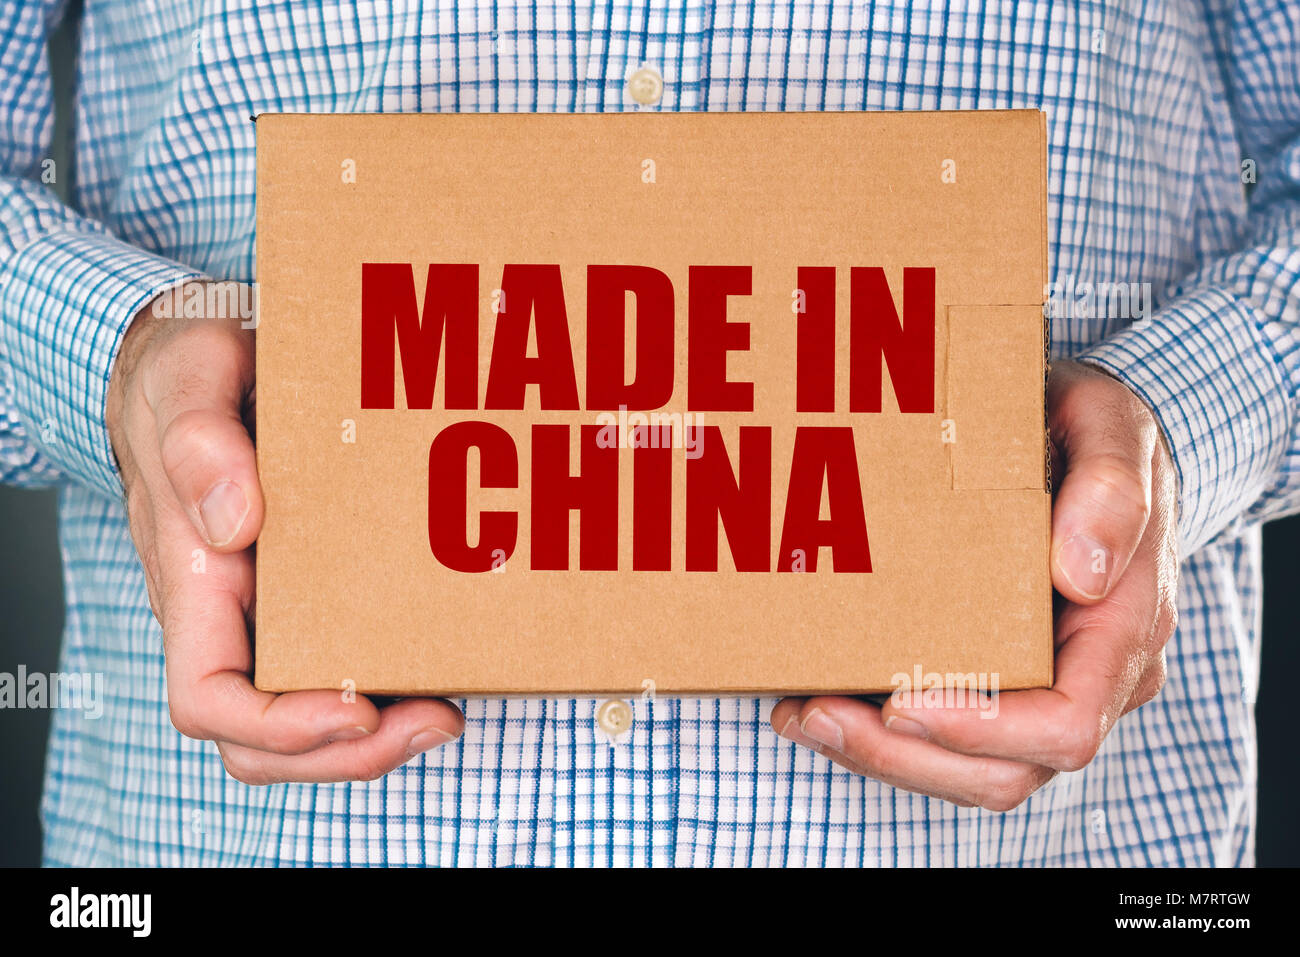 Man holding cardboard box product package with Made in China label imprint for merchandise goods imported from East Asia Stock Photo